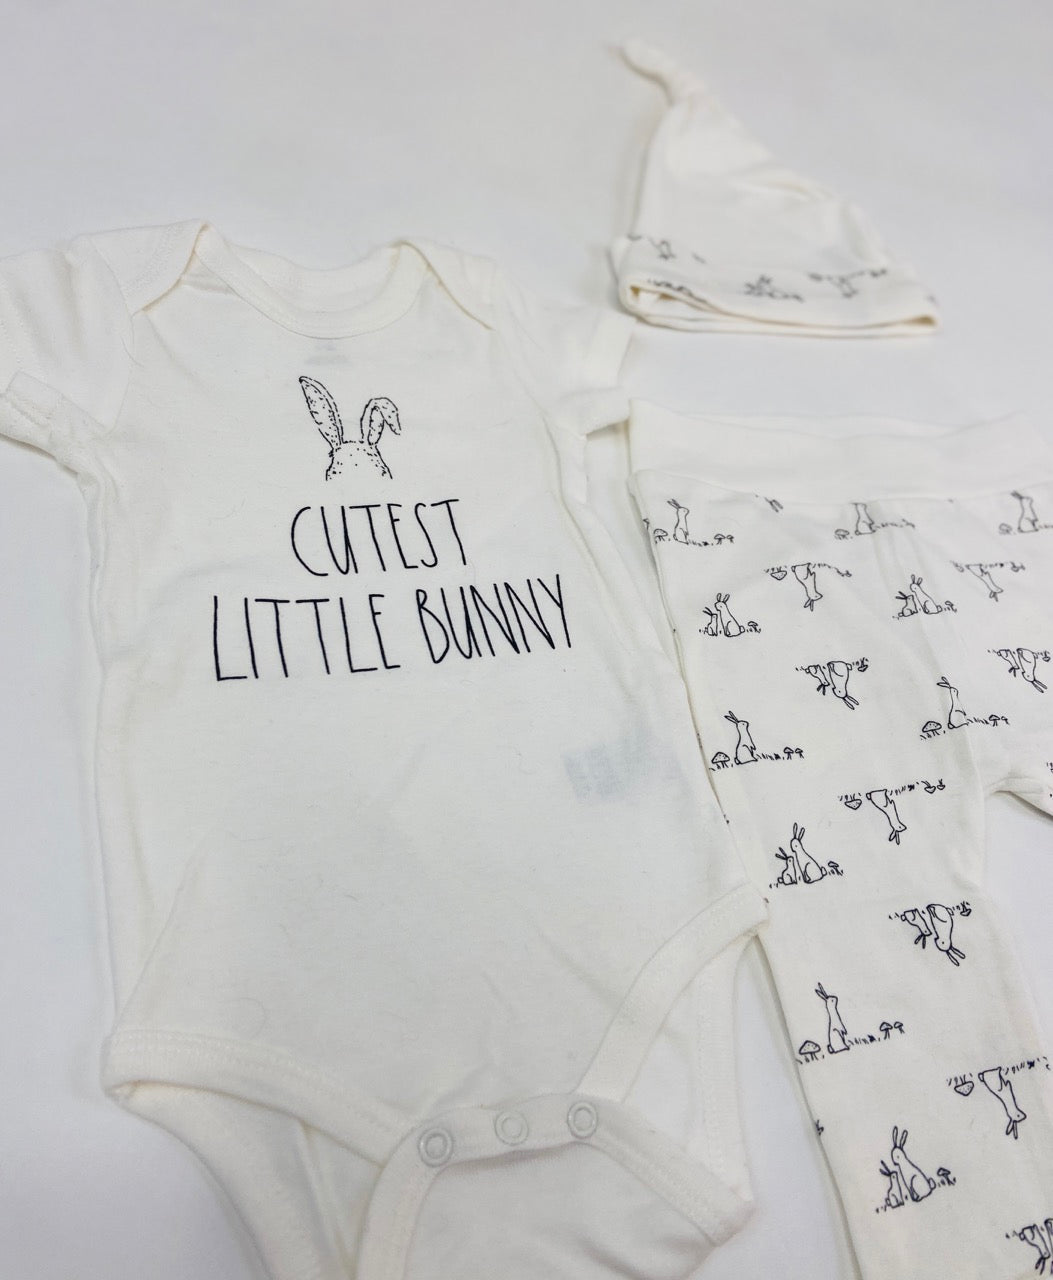 Rae Dunn "Cutest Little Bunny" Three Piece Outfit- 6/9 Months